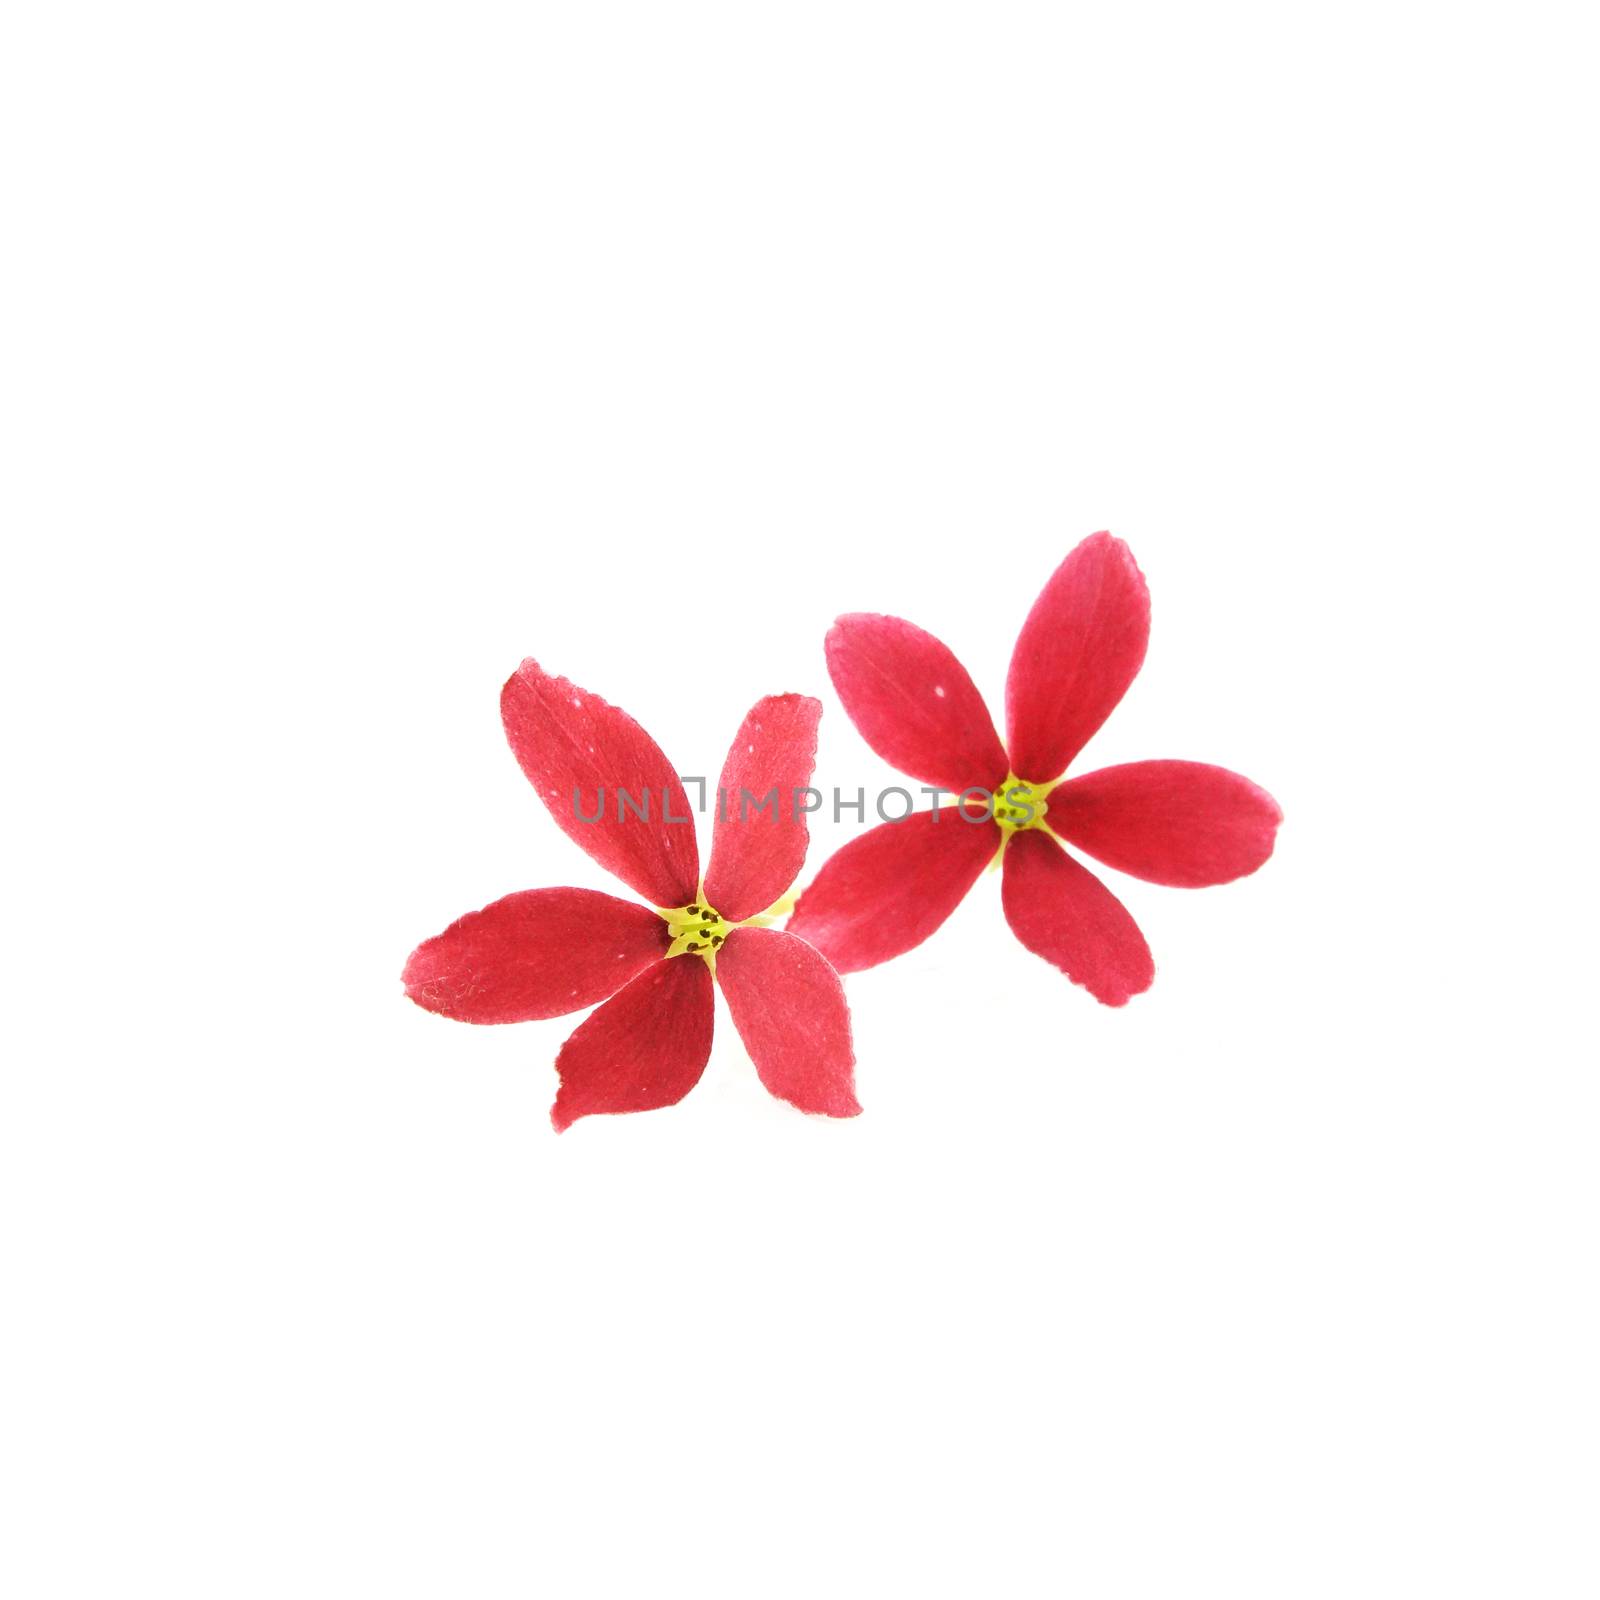 Red flower of Rangoon creeper on white background. by Noppharat_th